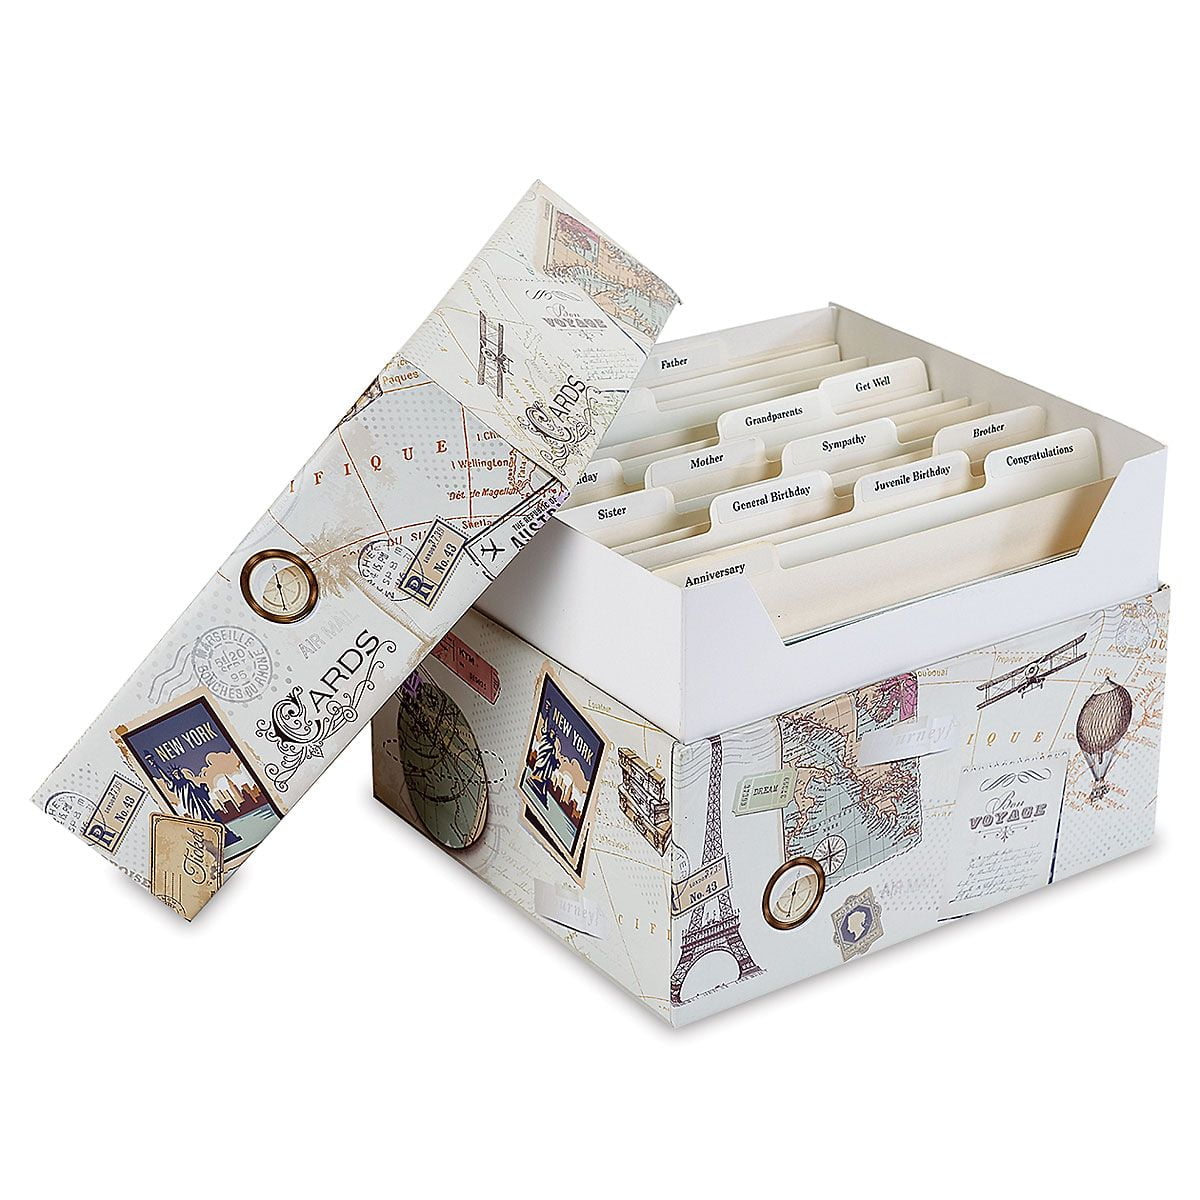 Designer Greetings Greeting Card Organizer Box with Beautiful Blue, Green  and White Design Holds up to 40 Cards; 711-00010-000